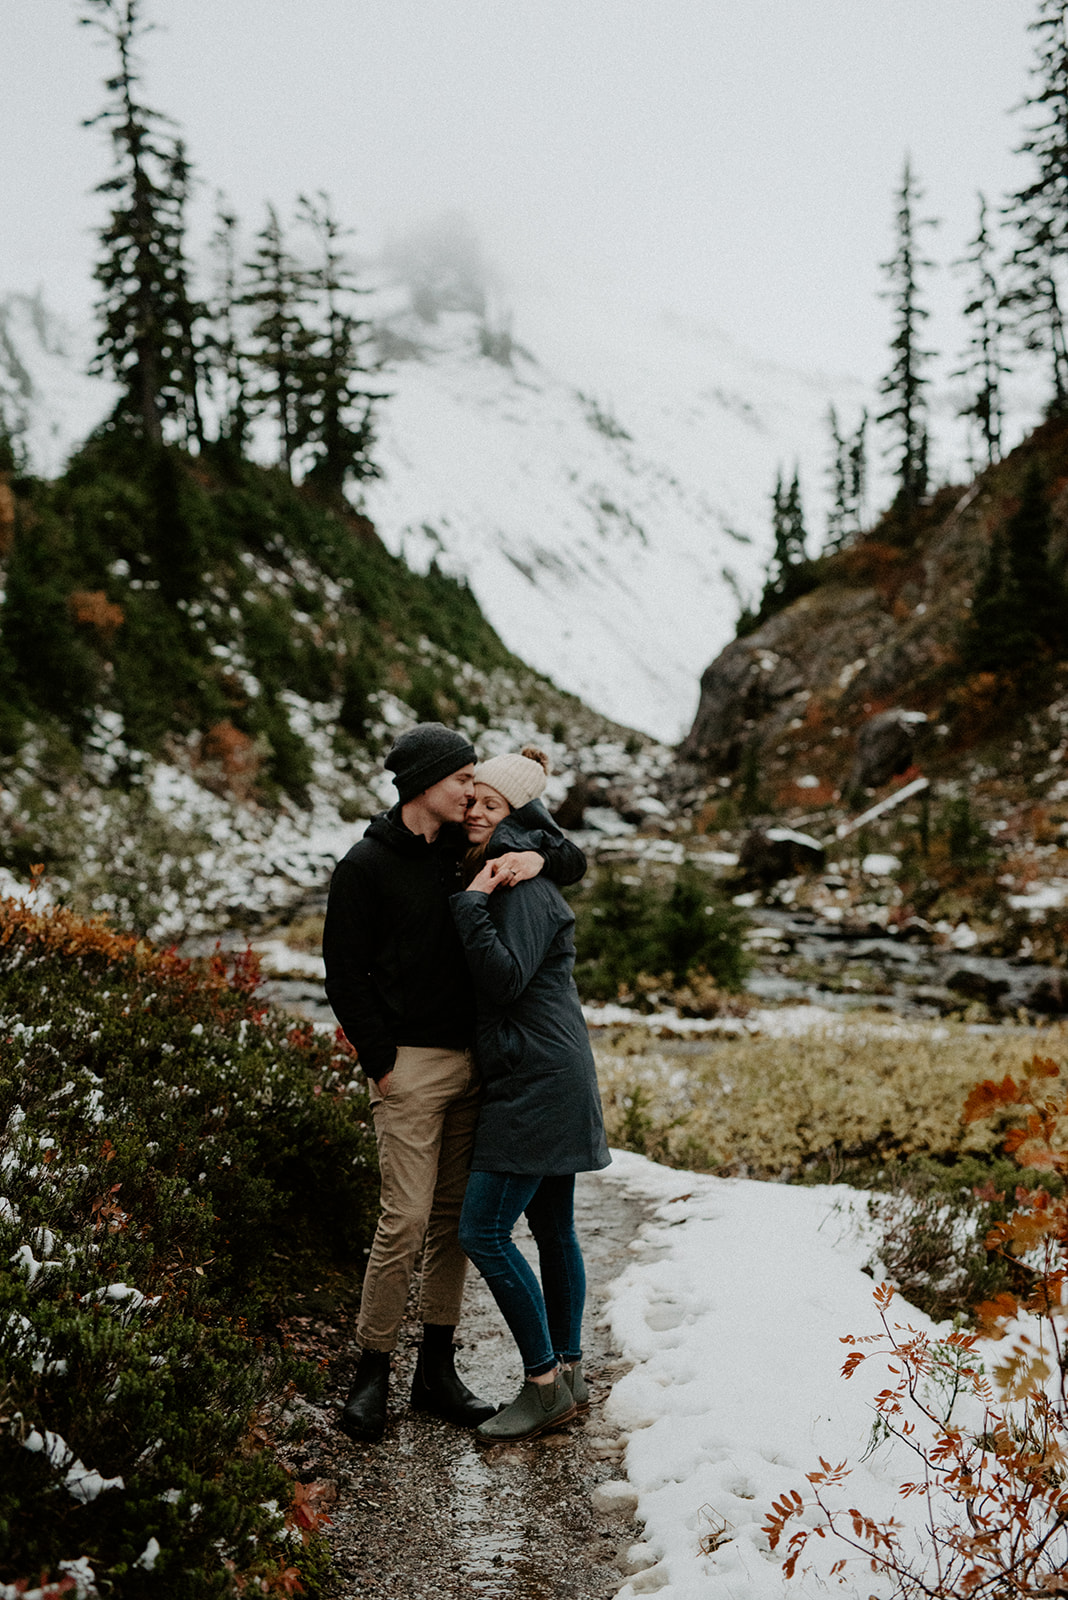 A couple shares a loving embrace during a winter stroll in the mountains, surrounded by snow-covered paths, evergreen trees, and rocky terrain.